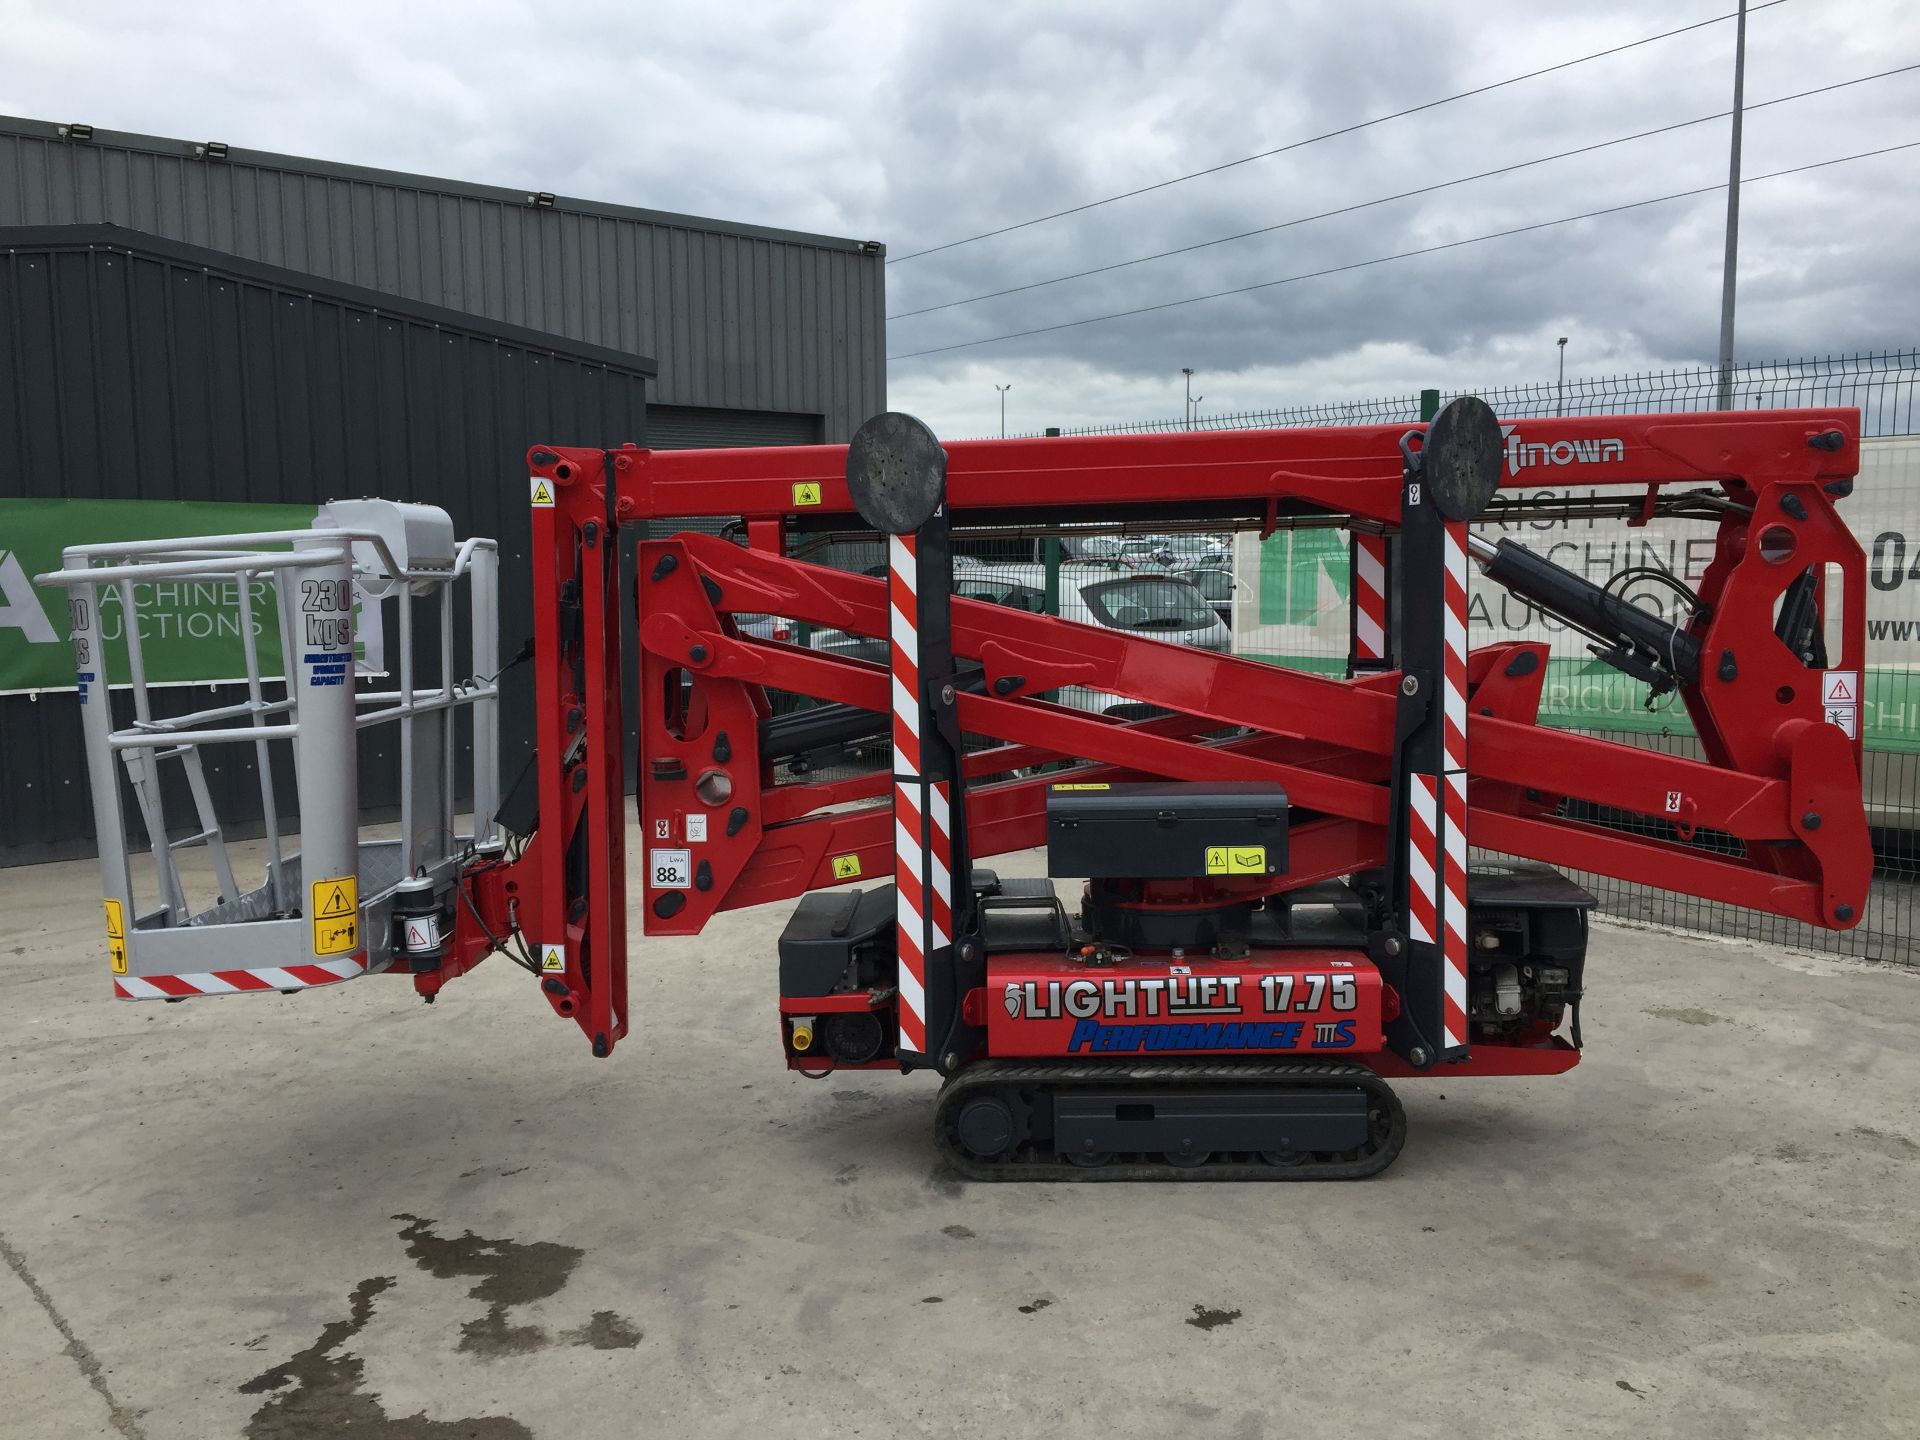 PL-14631 2012 Hinowa Lightlift 17.75 Performance Tracked Articulated Spider Boom Lift - Image 3 of 26